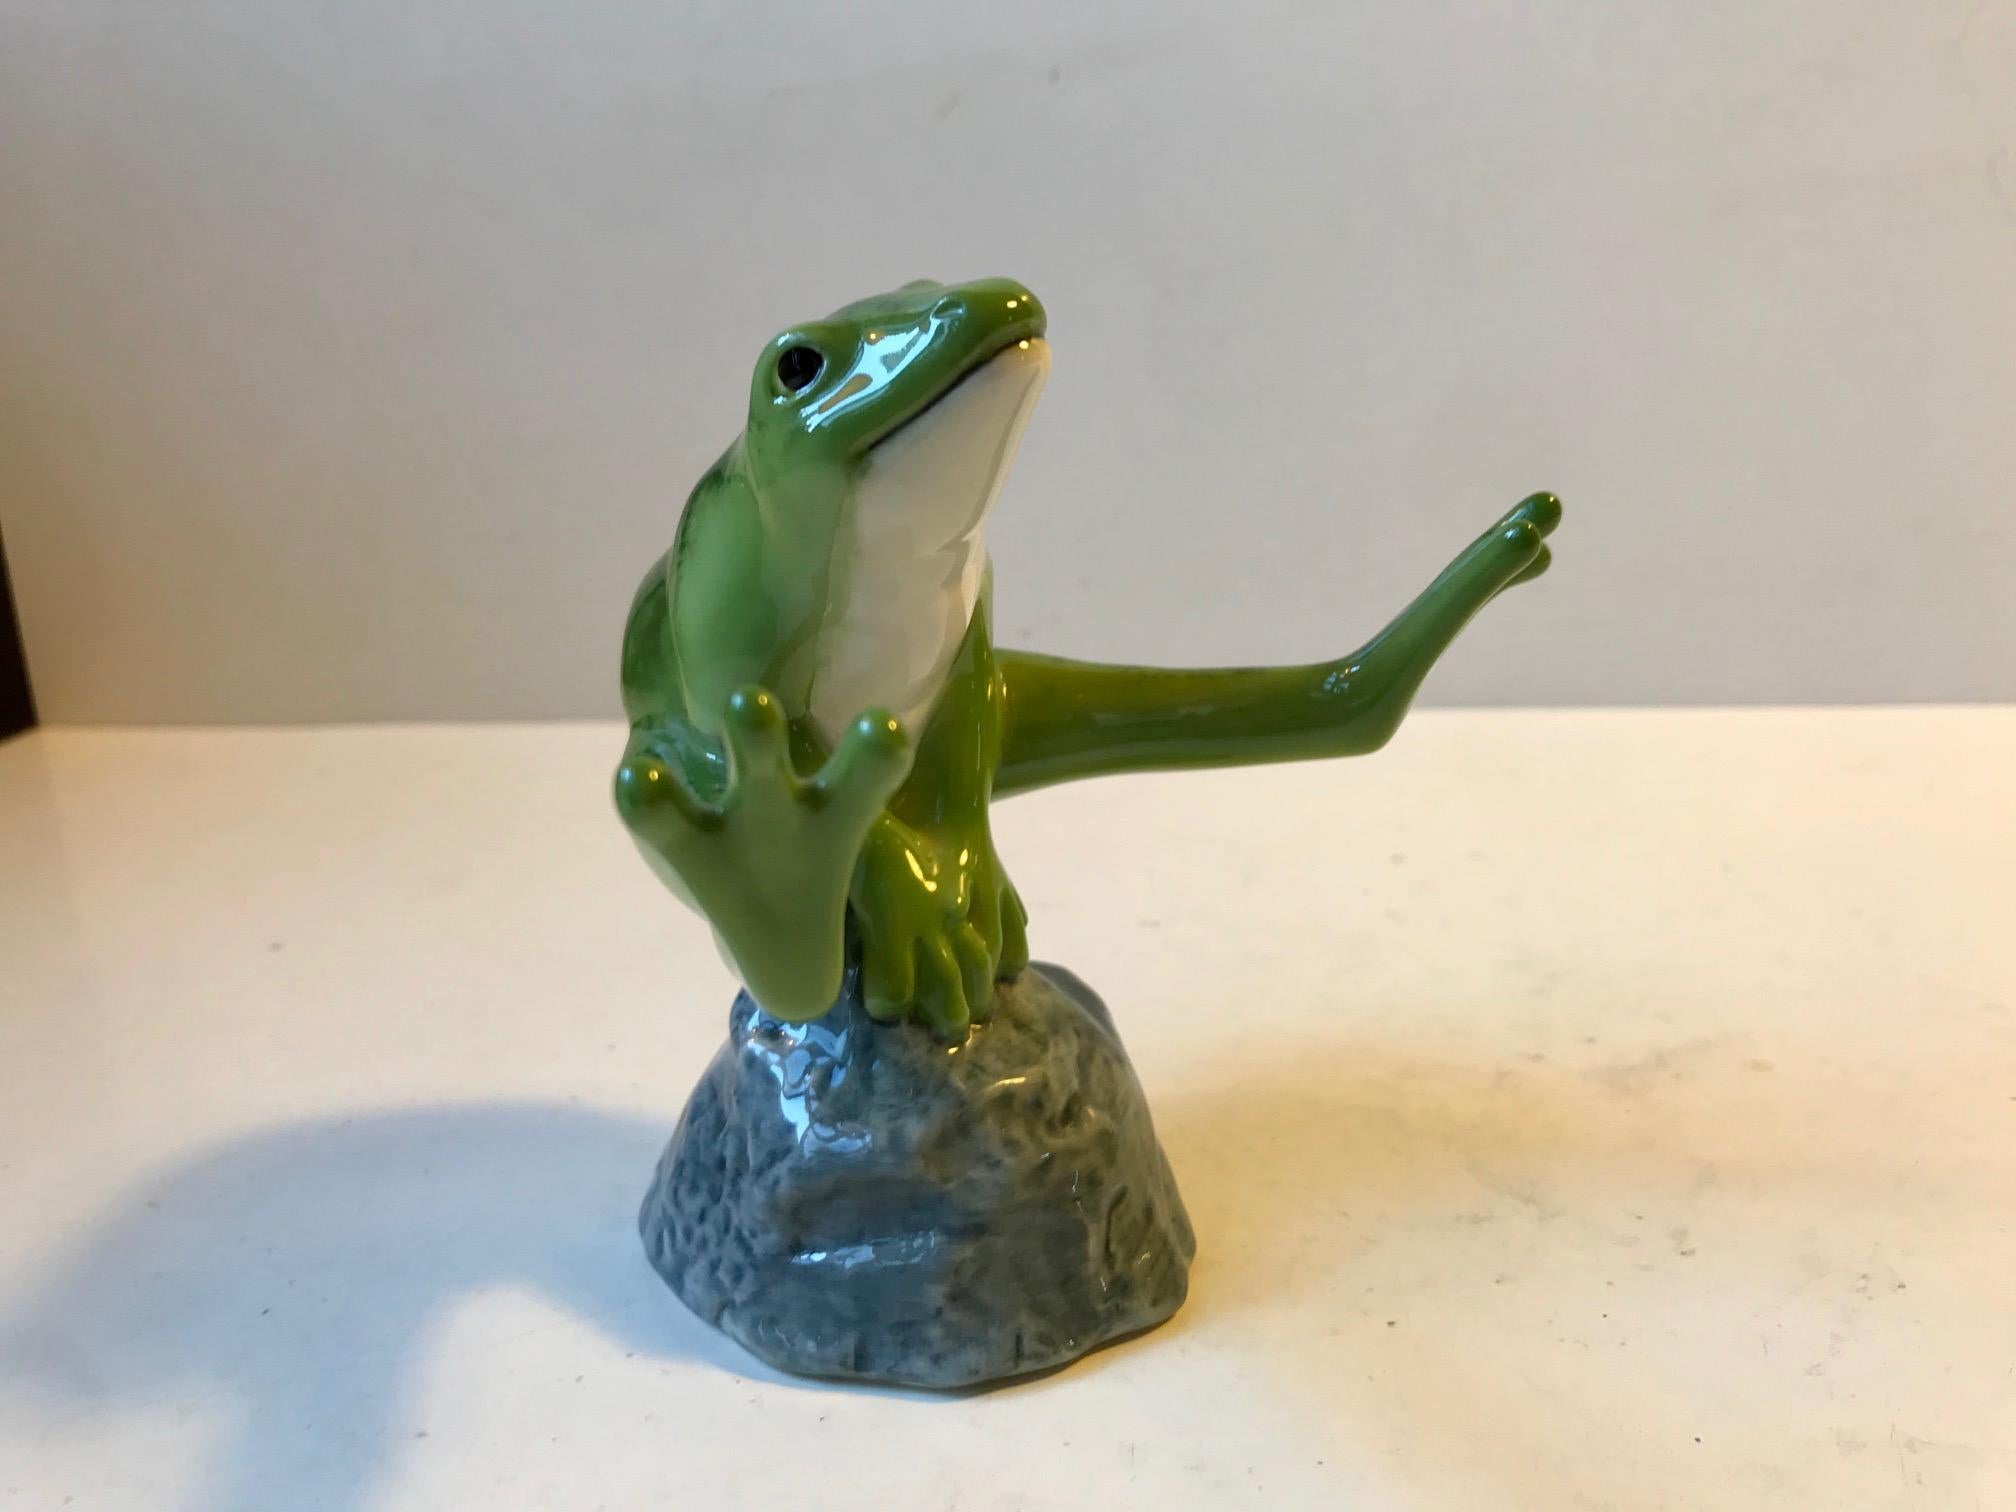 Designed by Danish sculptor Allan Therkelsen, this unusual Royal Copenhagen figurine depicts a Green Frog sitting on a rock ready to jump. It is a part of the 